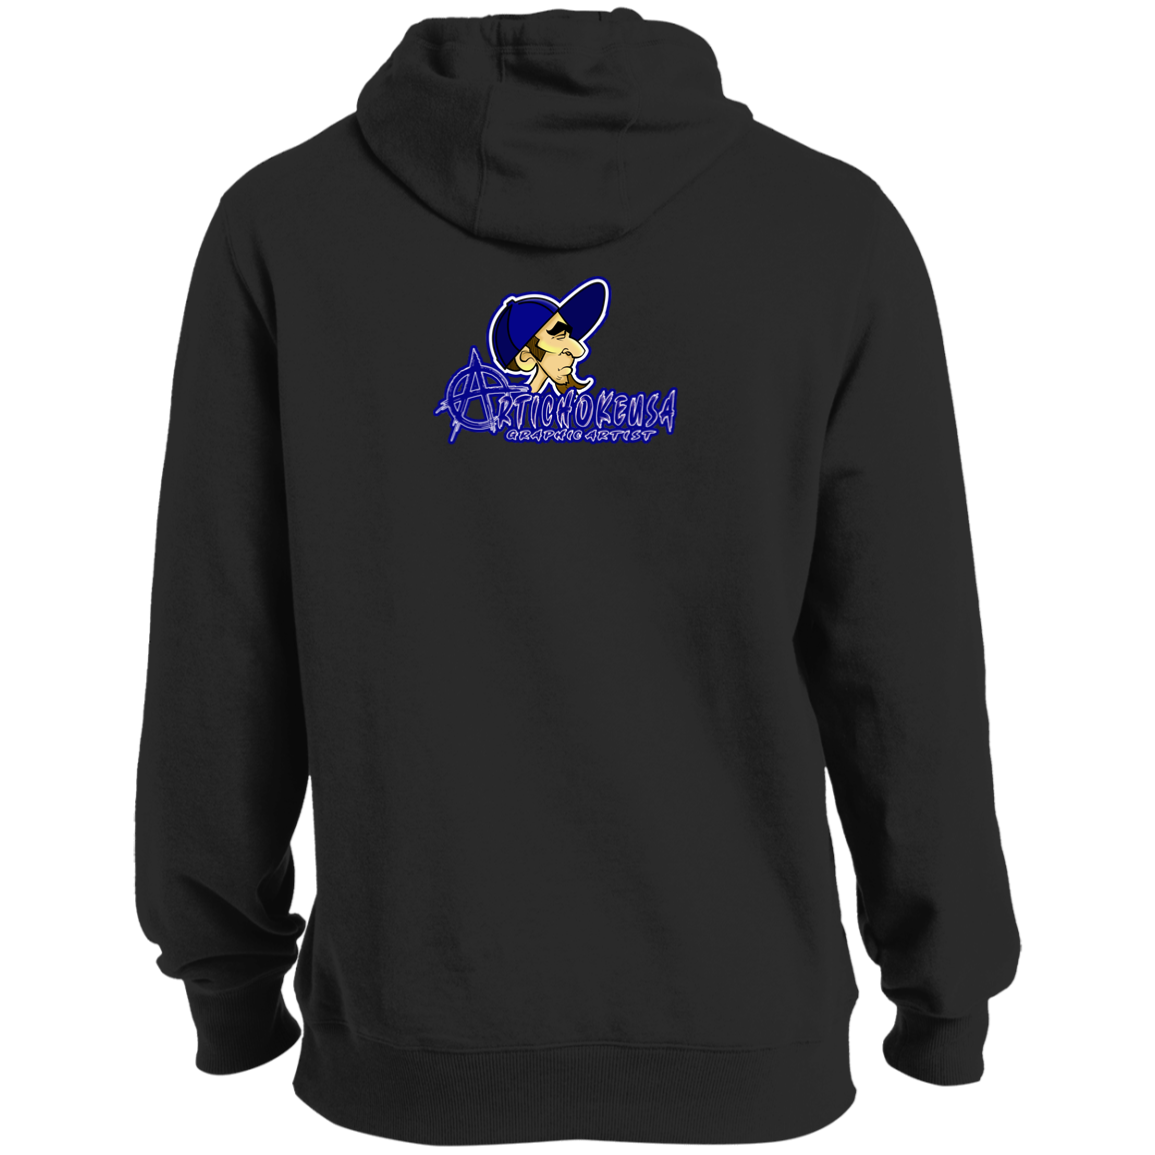 ZZ#20 ArtichokeUSA Characters and Fonts. "Clem" Let’s Create Your Own Design Today. Ultra Soft Pullover Hoodie